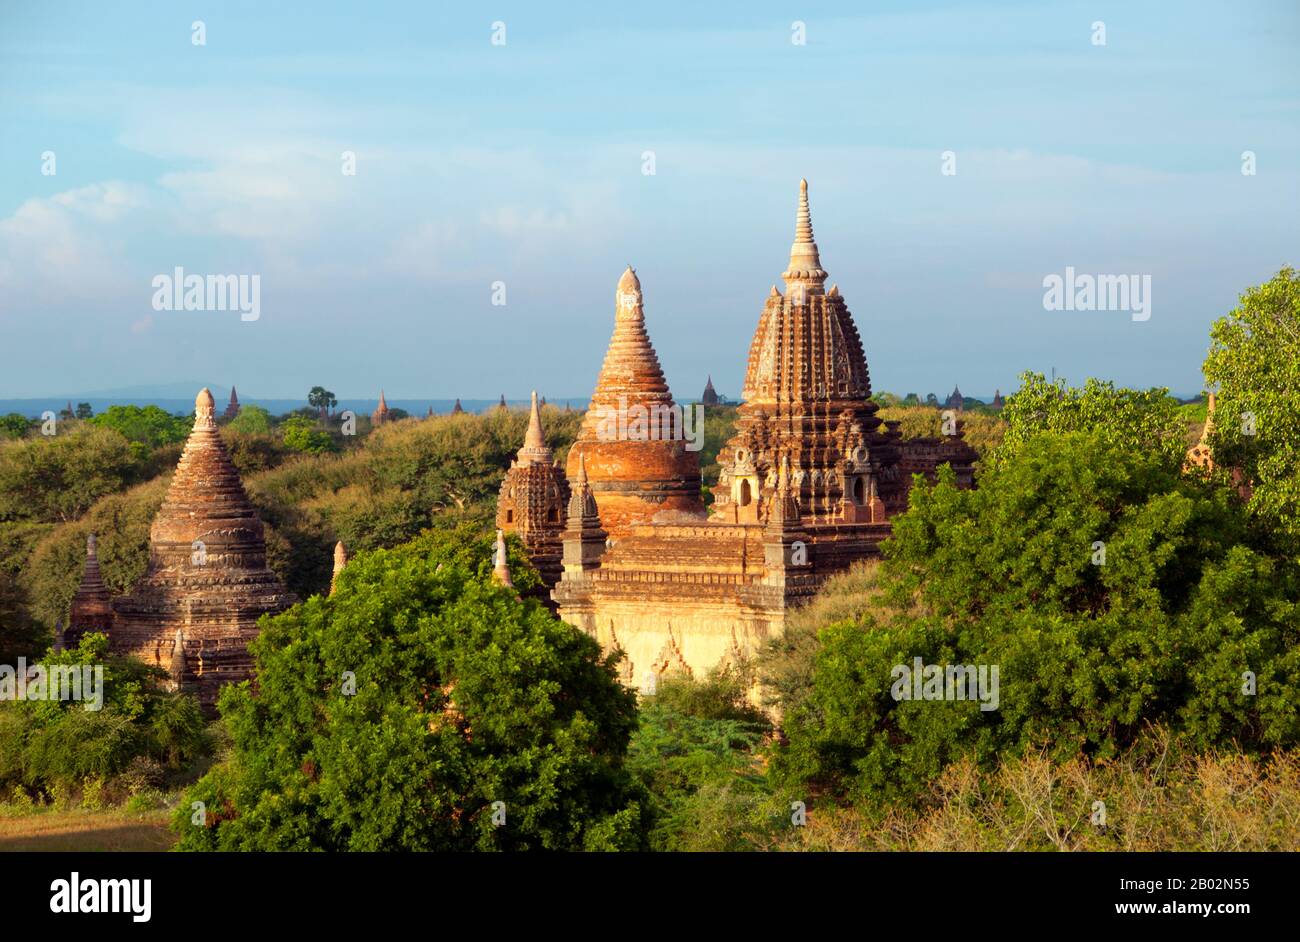 The Lokahteikpan temple was built around 1100 CE during the reign of King Kyanzittha (r. 1084 - 1113).  Bagan, formerly Pagan, was mainly built between the 11th century and 13th century. Formally titled Arimaddanapura or Arimaddana (the City of the Enemy Crusher) and also known as Tambadipa (the Land of Copper) or Tassadessa (the Parched Land), it was the capital of several ancient kingdoms in Burma. Stock Photo